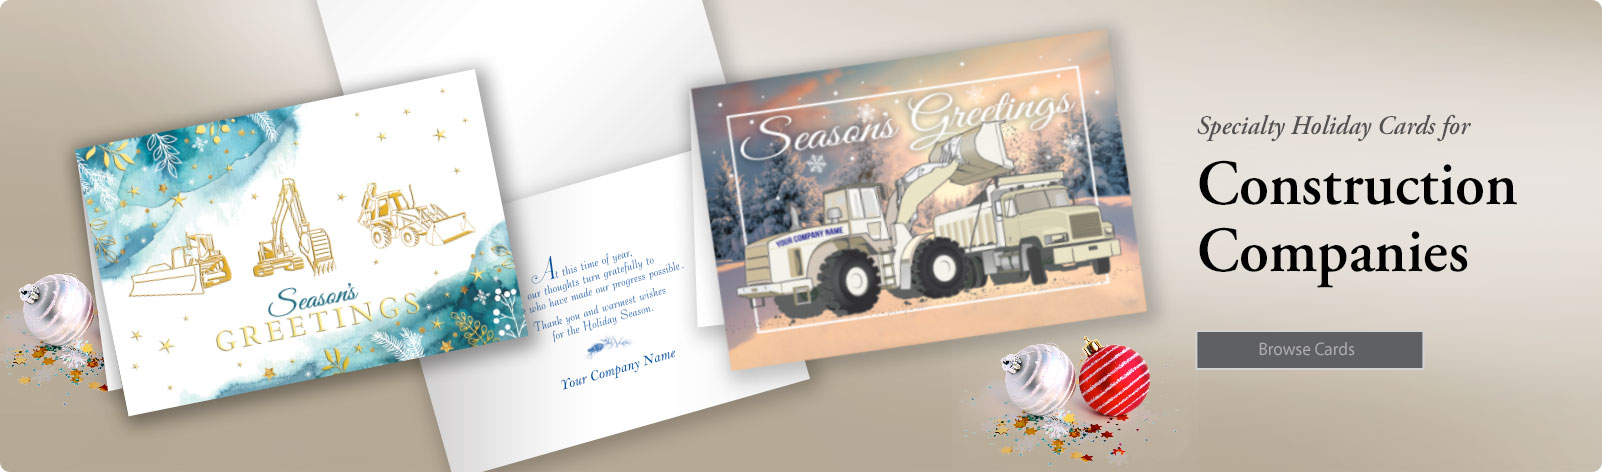 Construction-Excavating-Paving Full Color Personalized Christmas Holiday Cards!